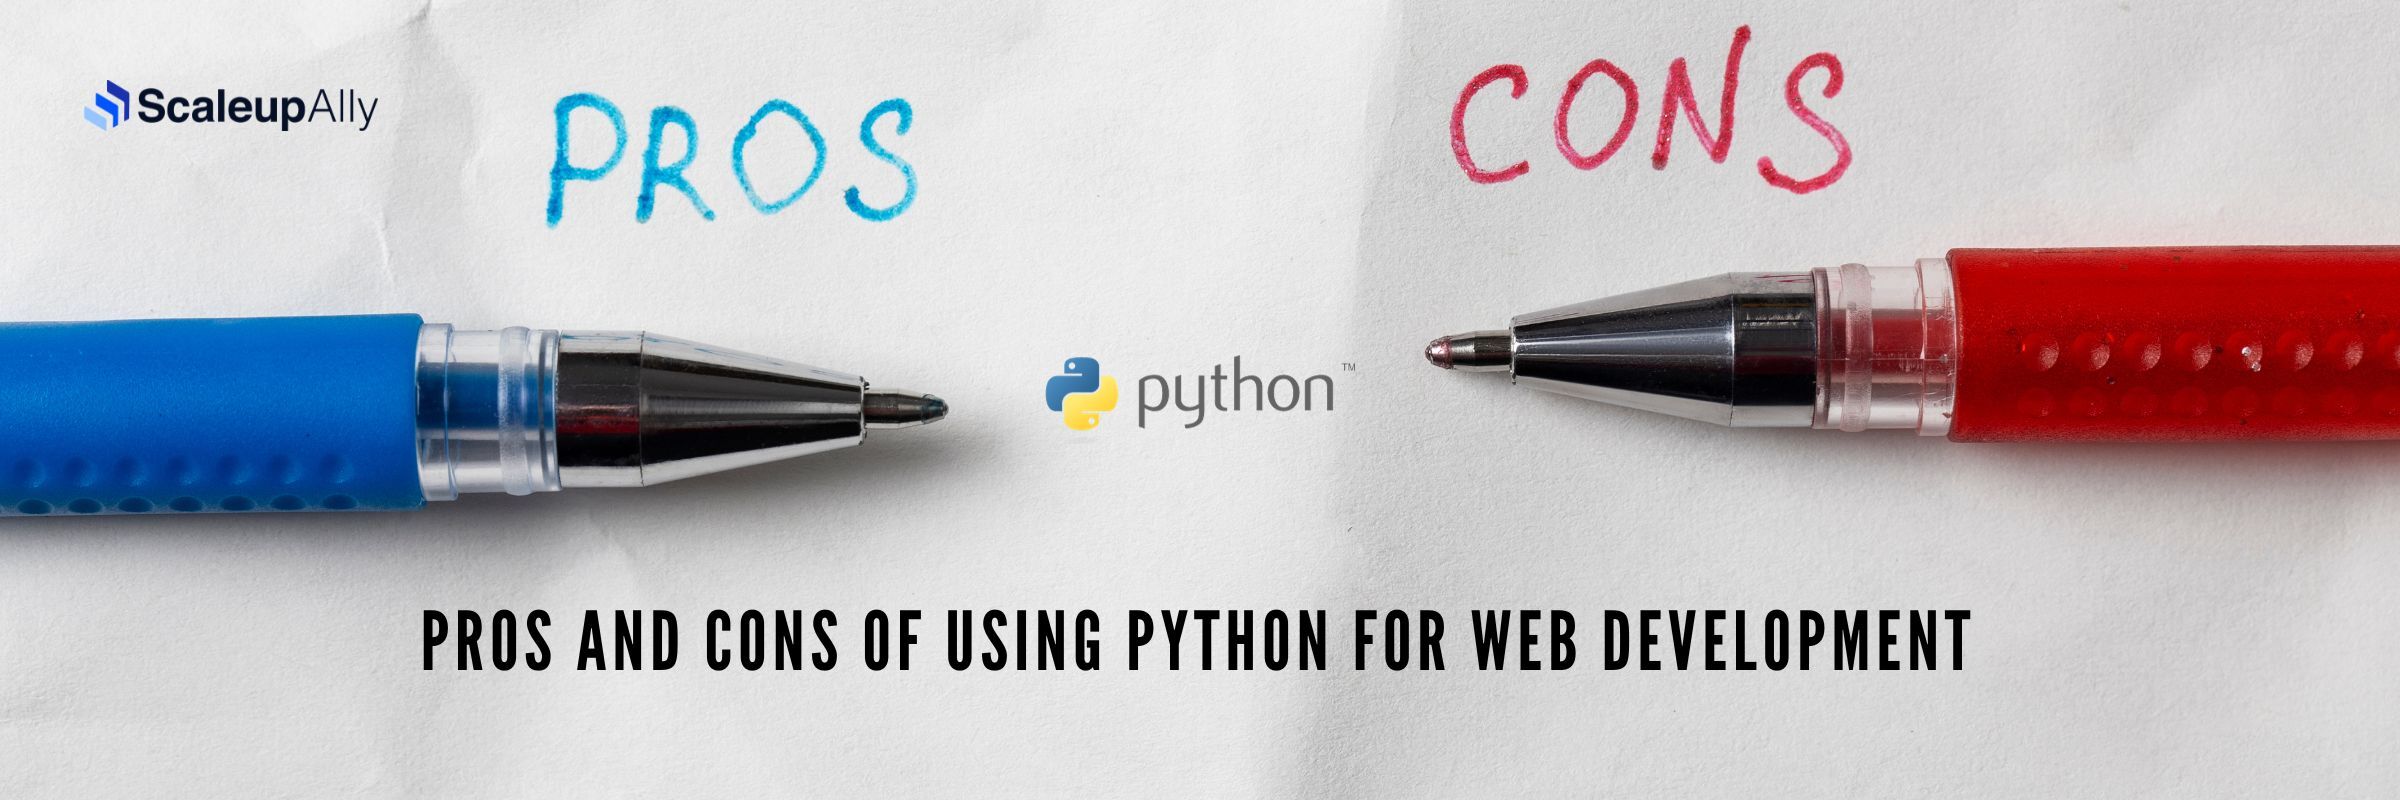 18 Pros and Cons of using Python for Web Development